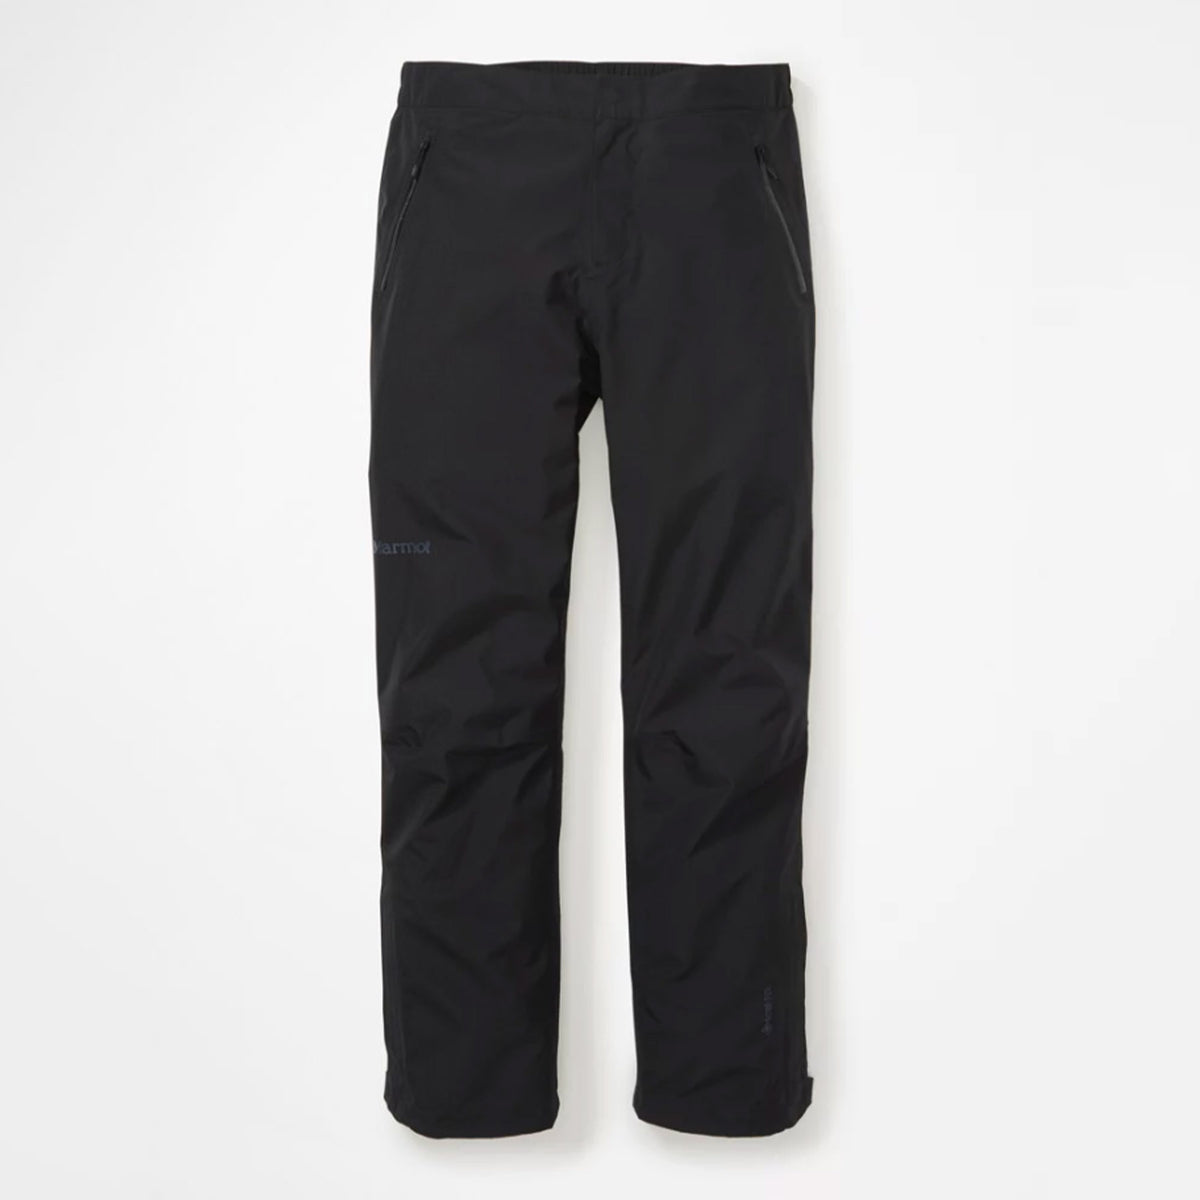 Hero image featuring the front of the Marmot Men's Minimalist Gore Tex Pant in black